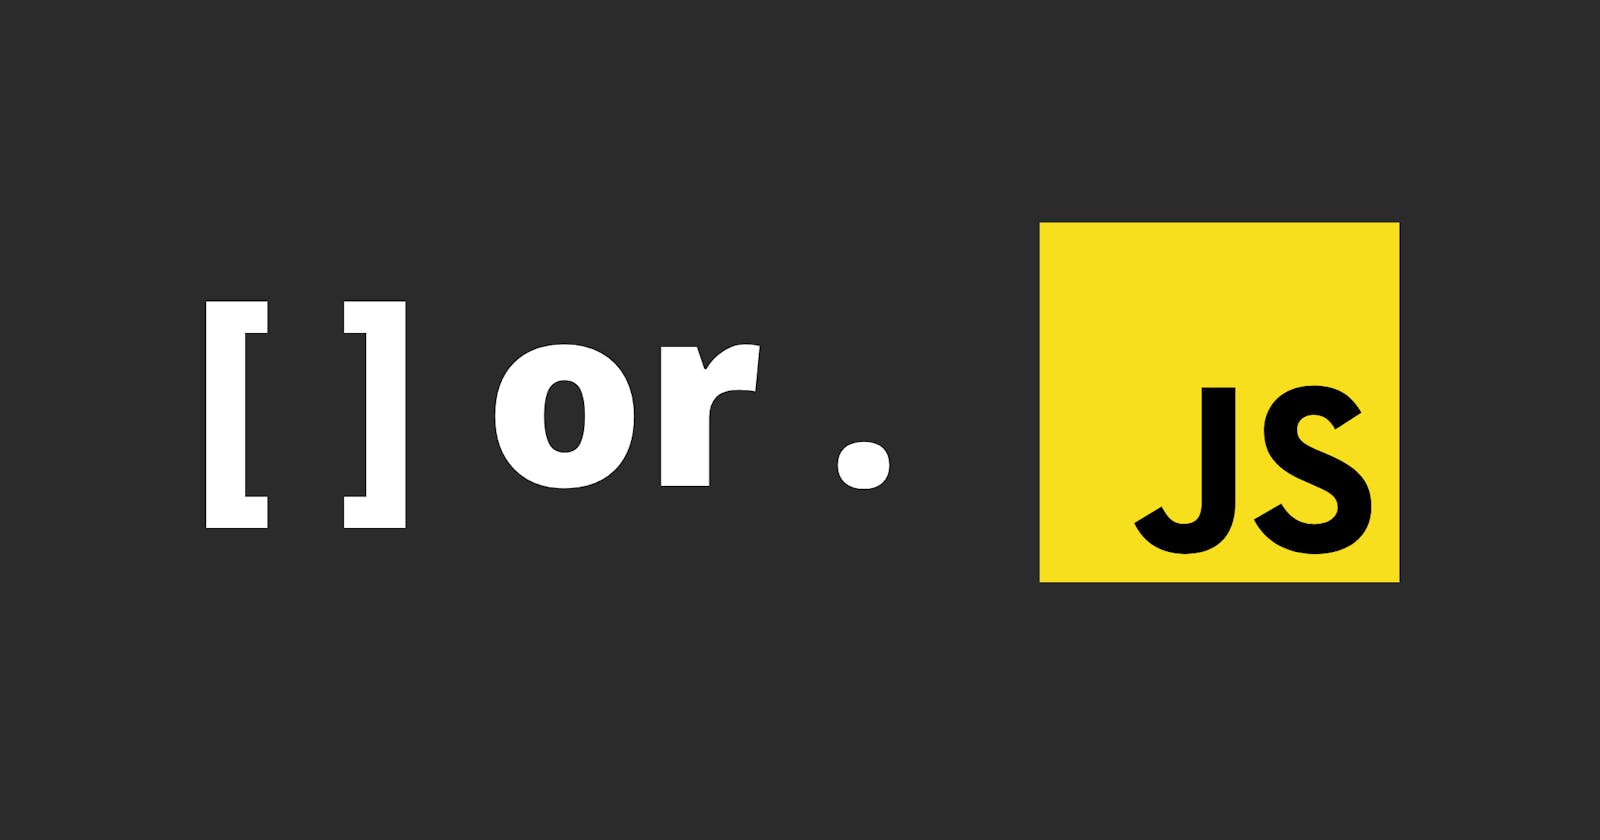 JavaScript Quirks: Dot vs. Bracket - Not all notation is created equally